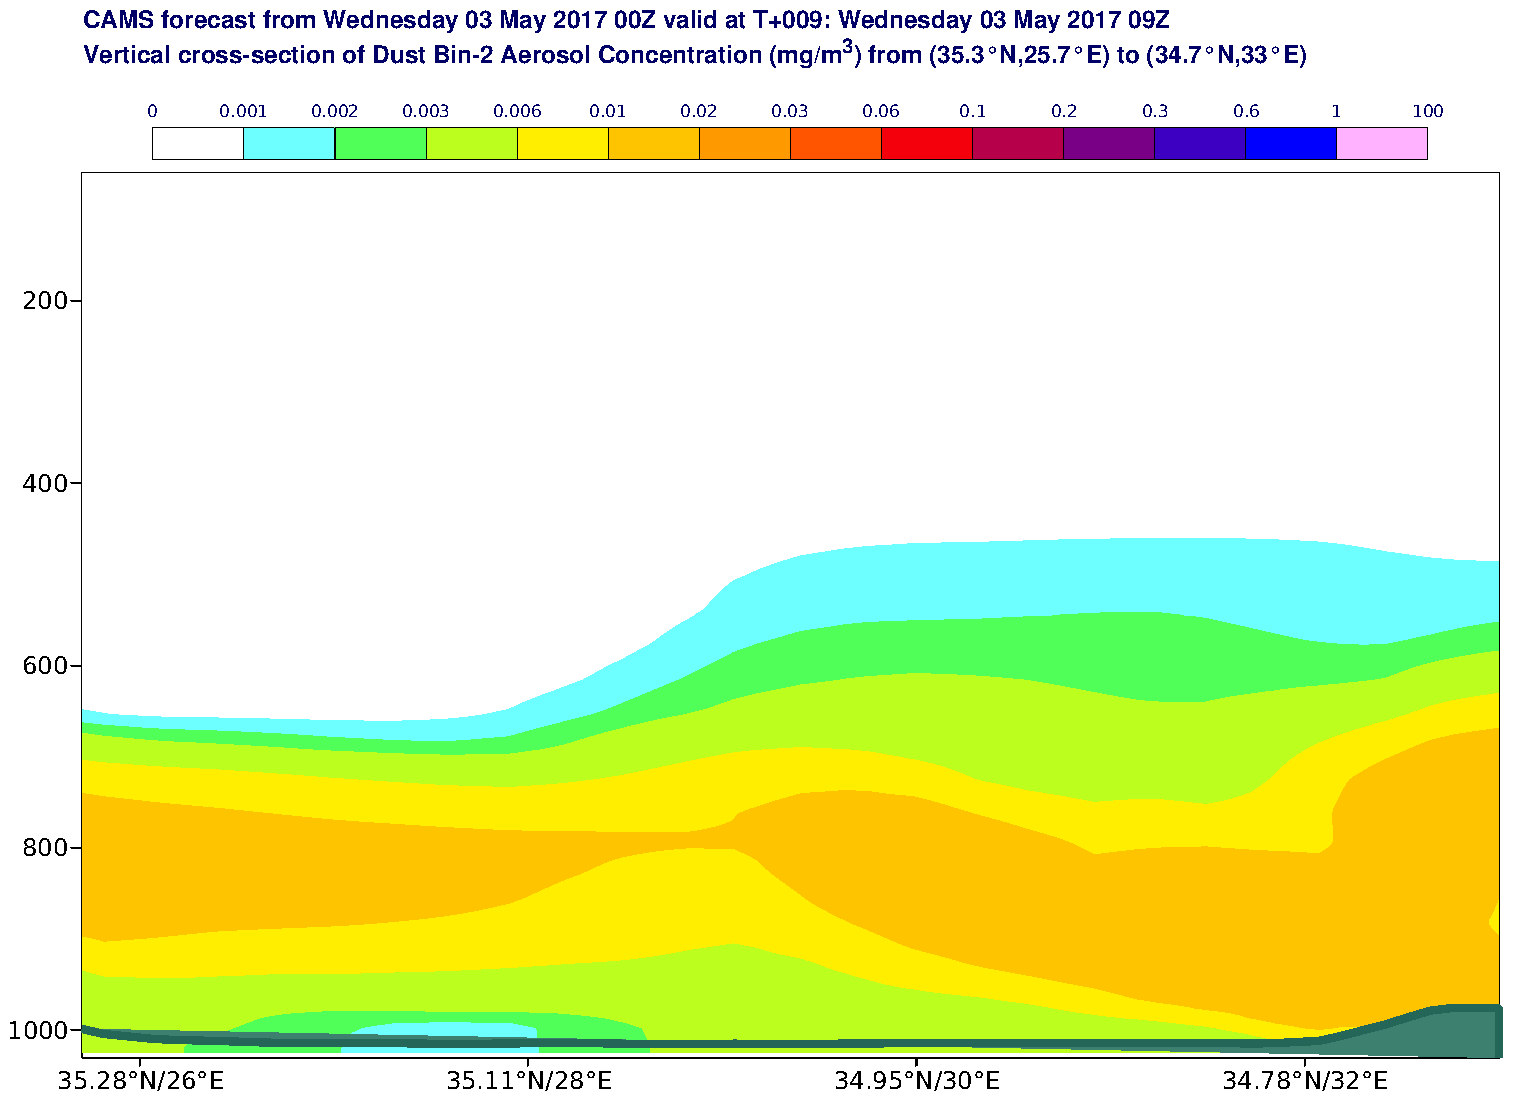 Vertical cross-section of Dust Bin-2 Aerosol Concentration (mg/m3) valid at T9 - 2017-05-03 09:00